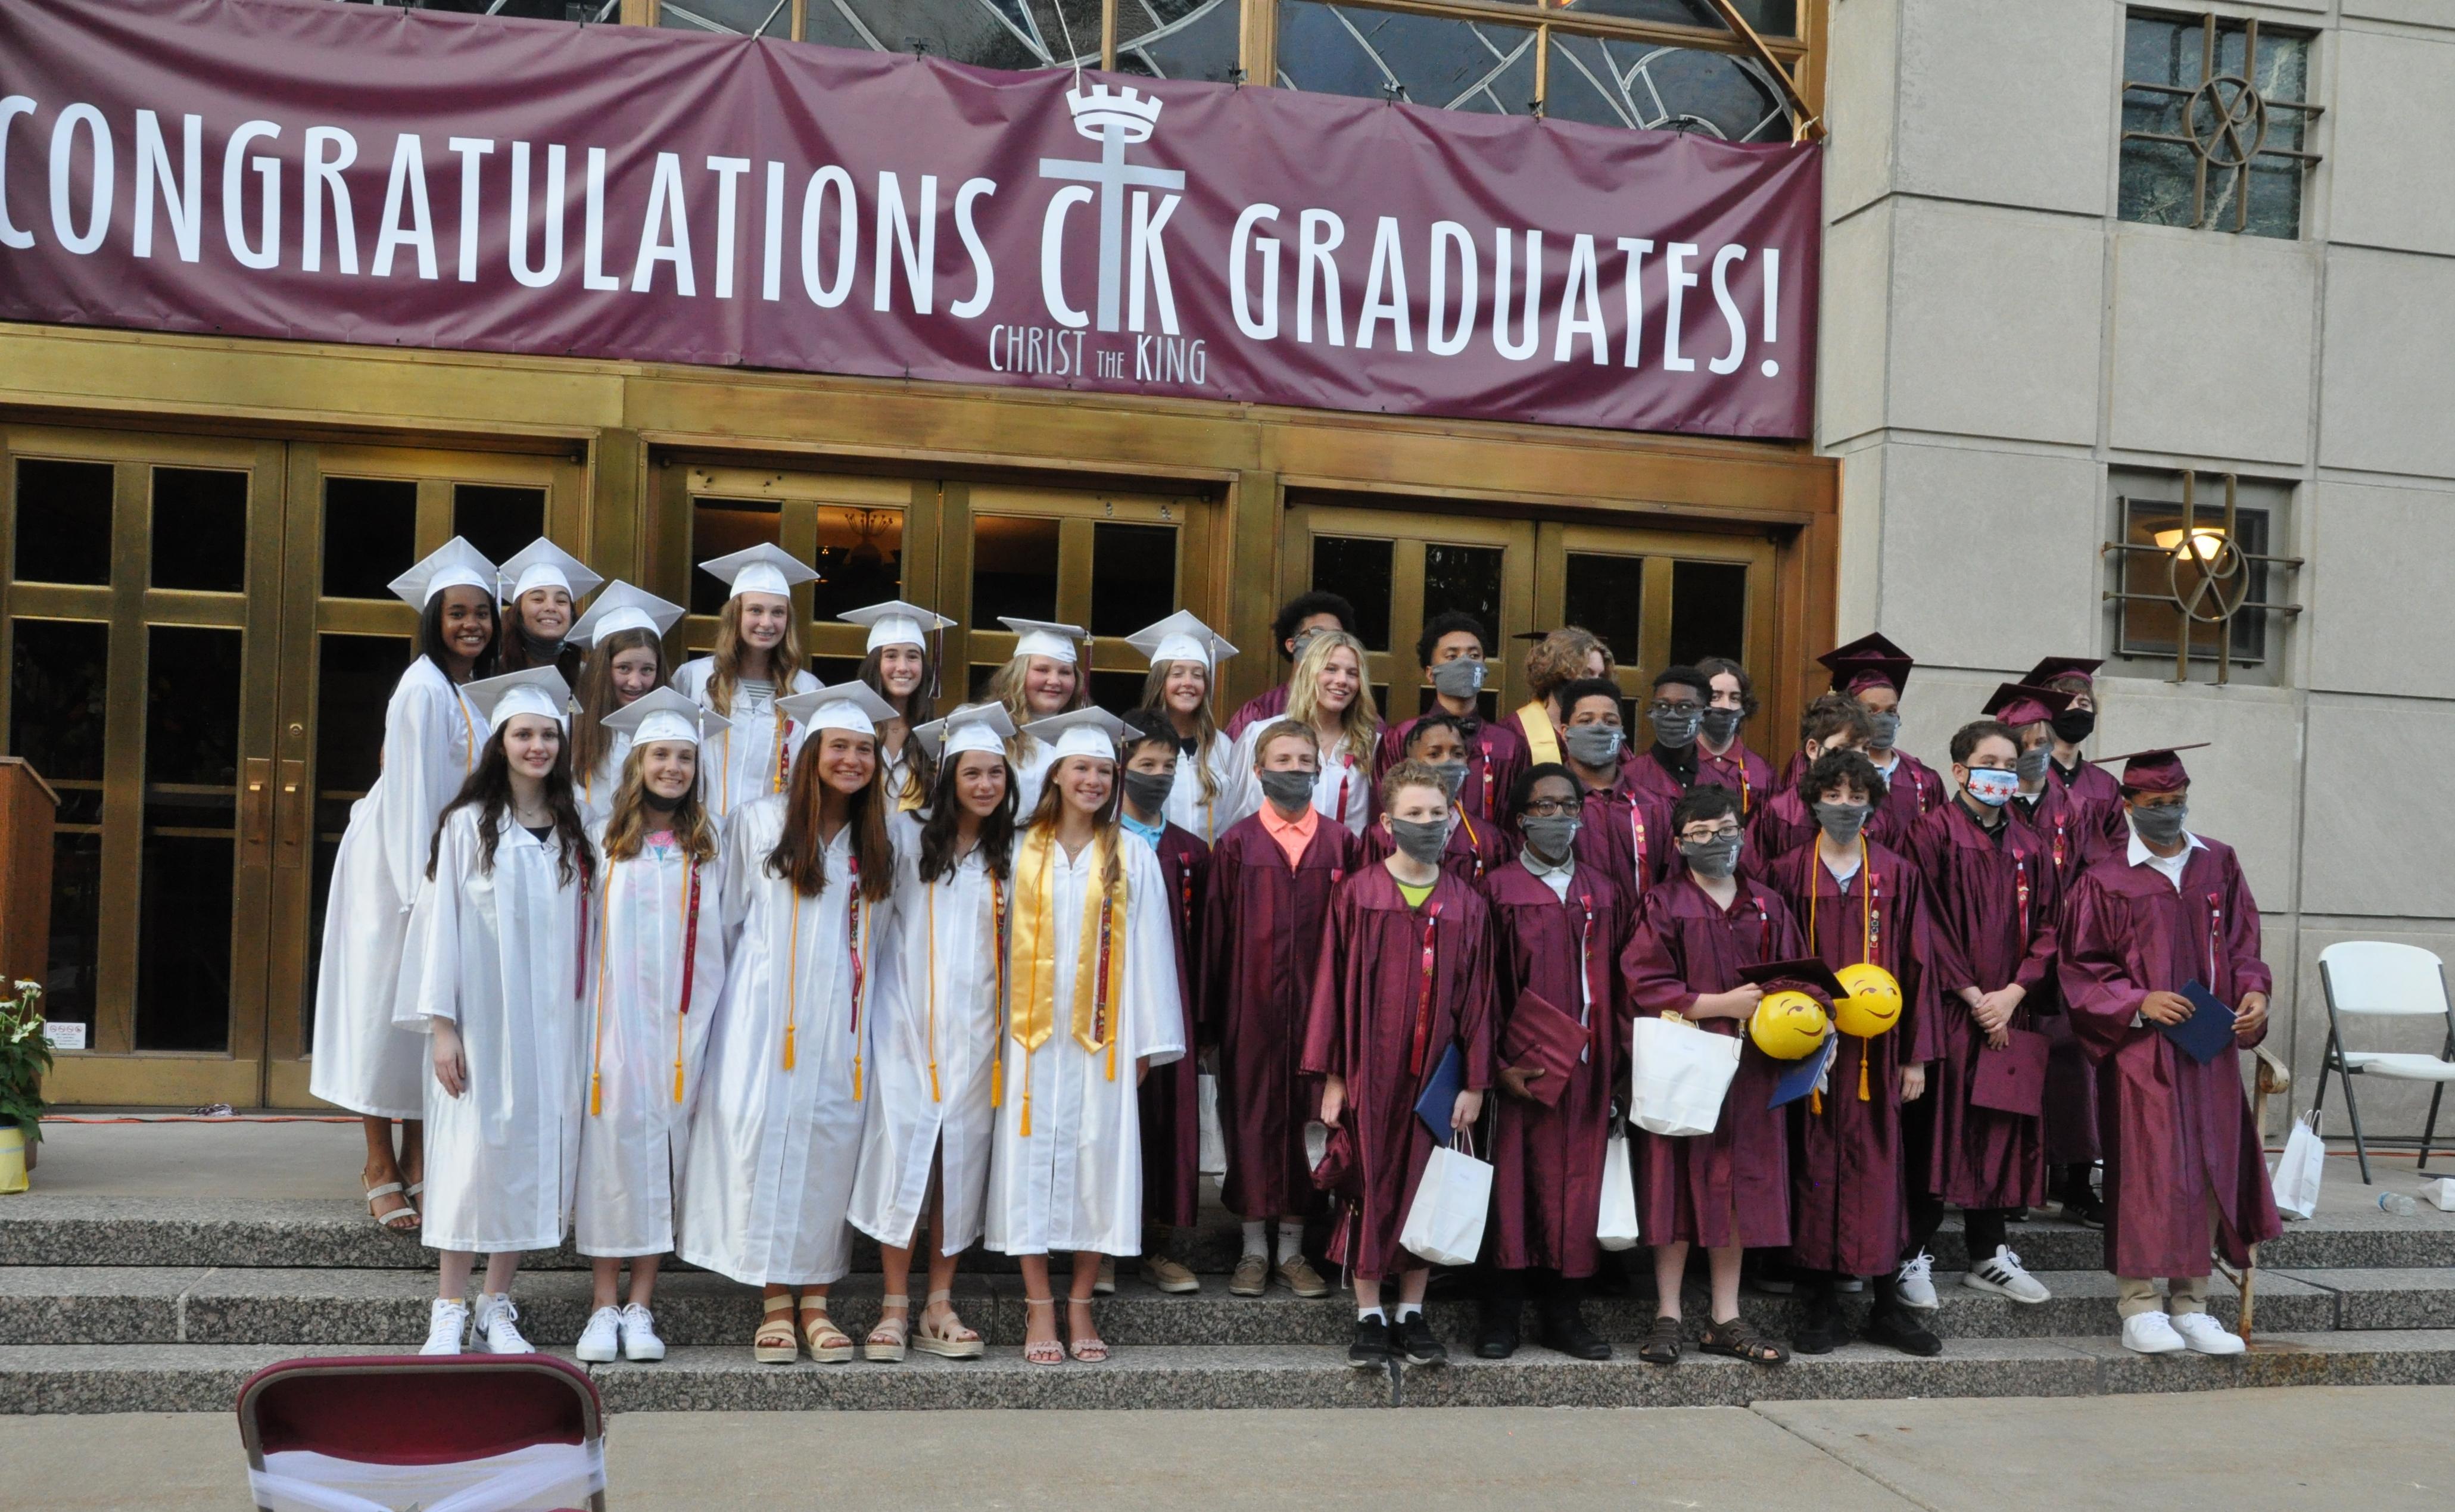 Congratulations to our Graduates! Christ the King School